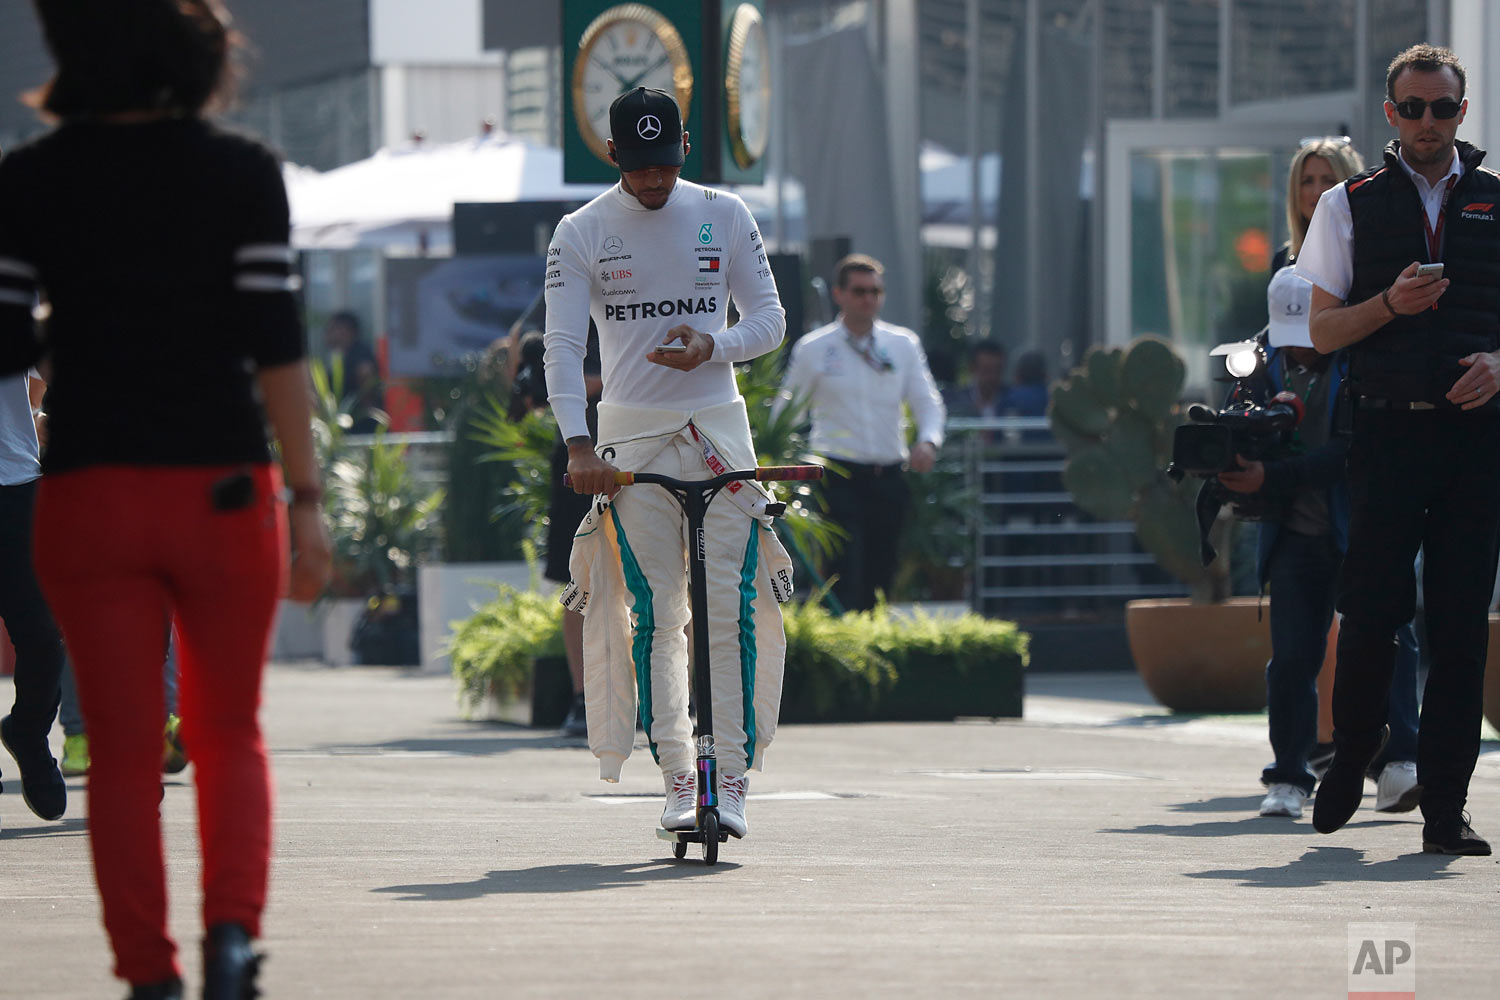  Mercedes driver Lewis Hamilton, of Britain, rides a scooter to the pit lane ahead of the first training session of the Formula One Mexico Grand Prix auto race at the Hermanos Rodriguez racetrack in Mexico City, Oct. 26, 2018. (AP Photo/Moises Castil